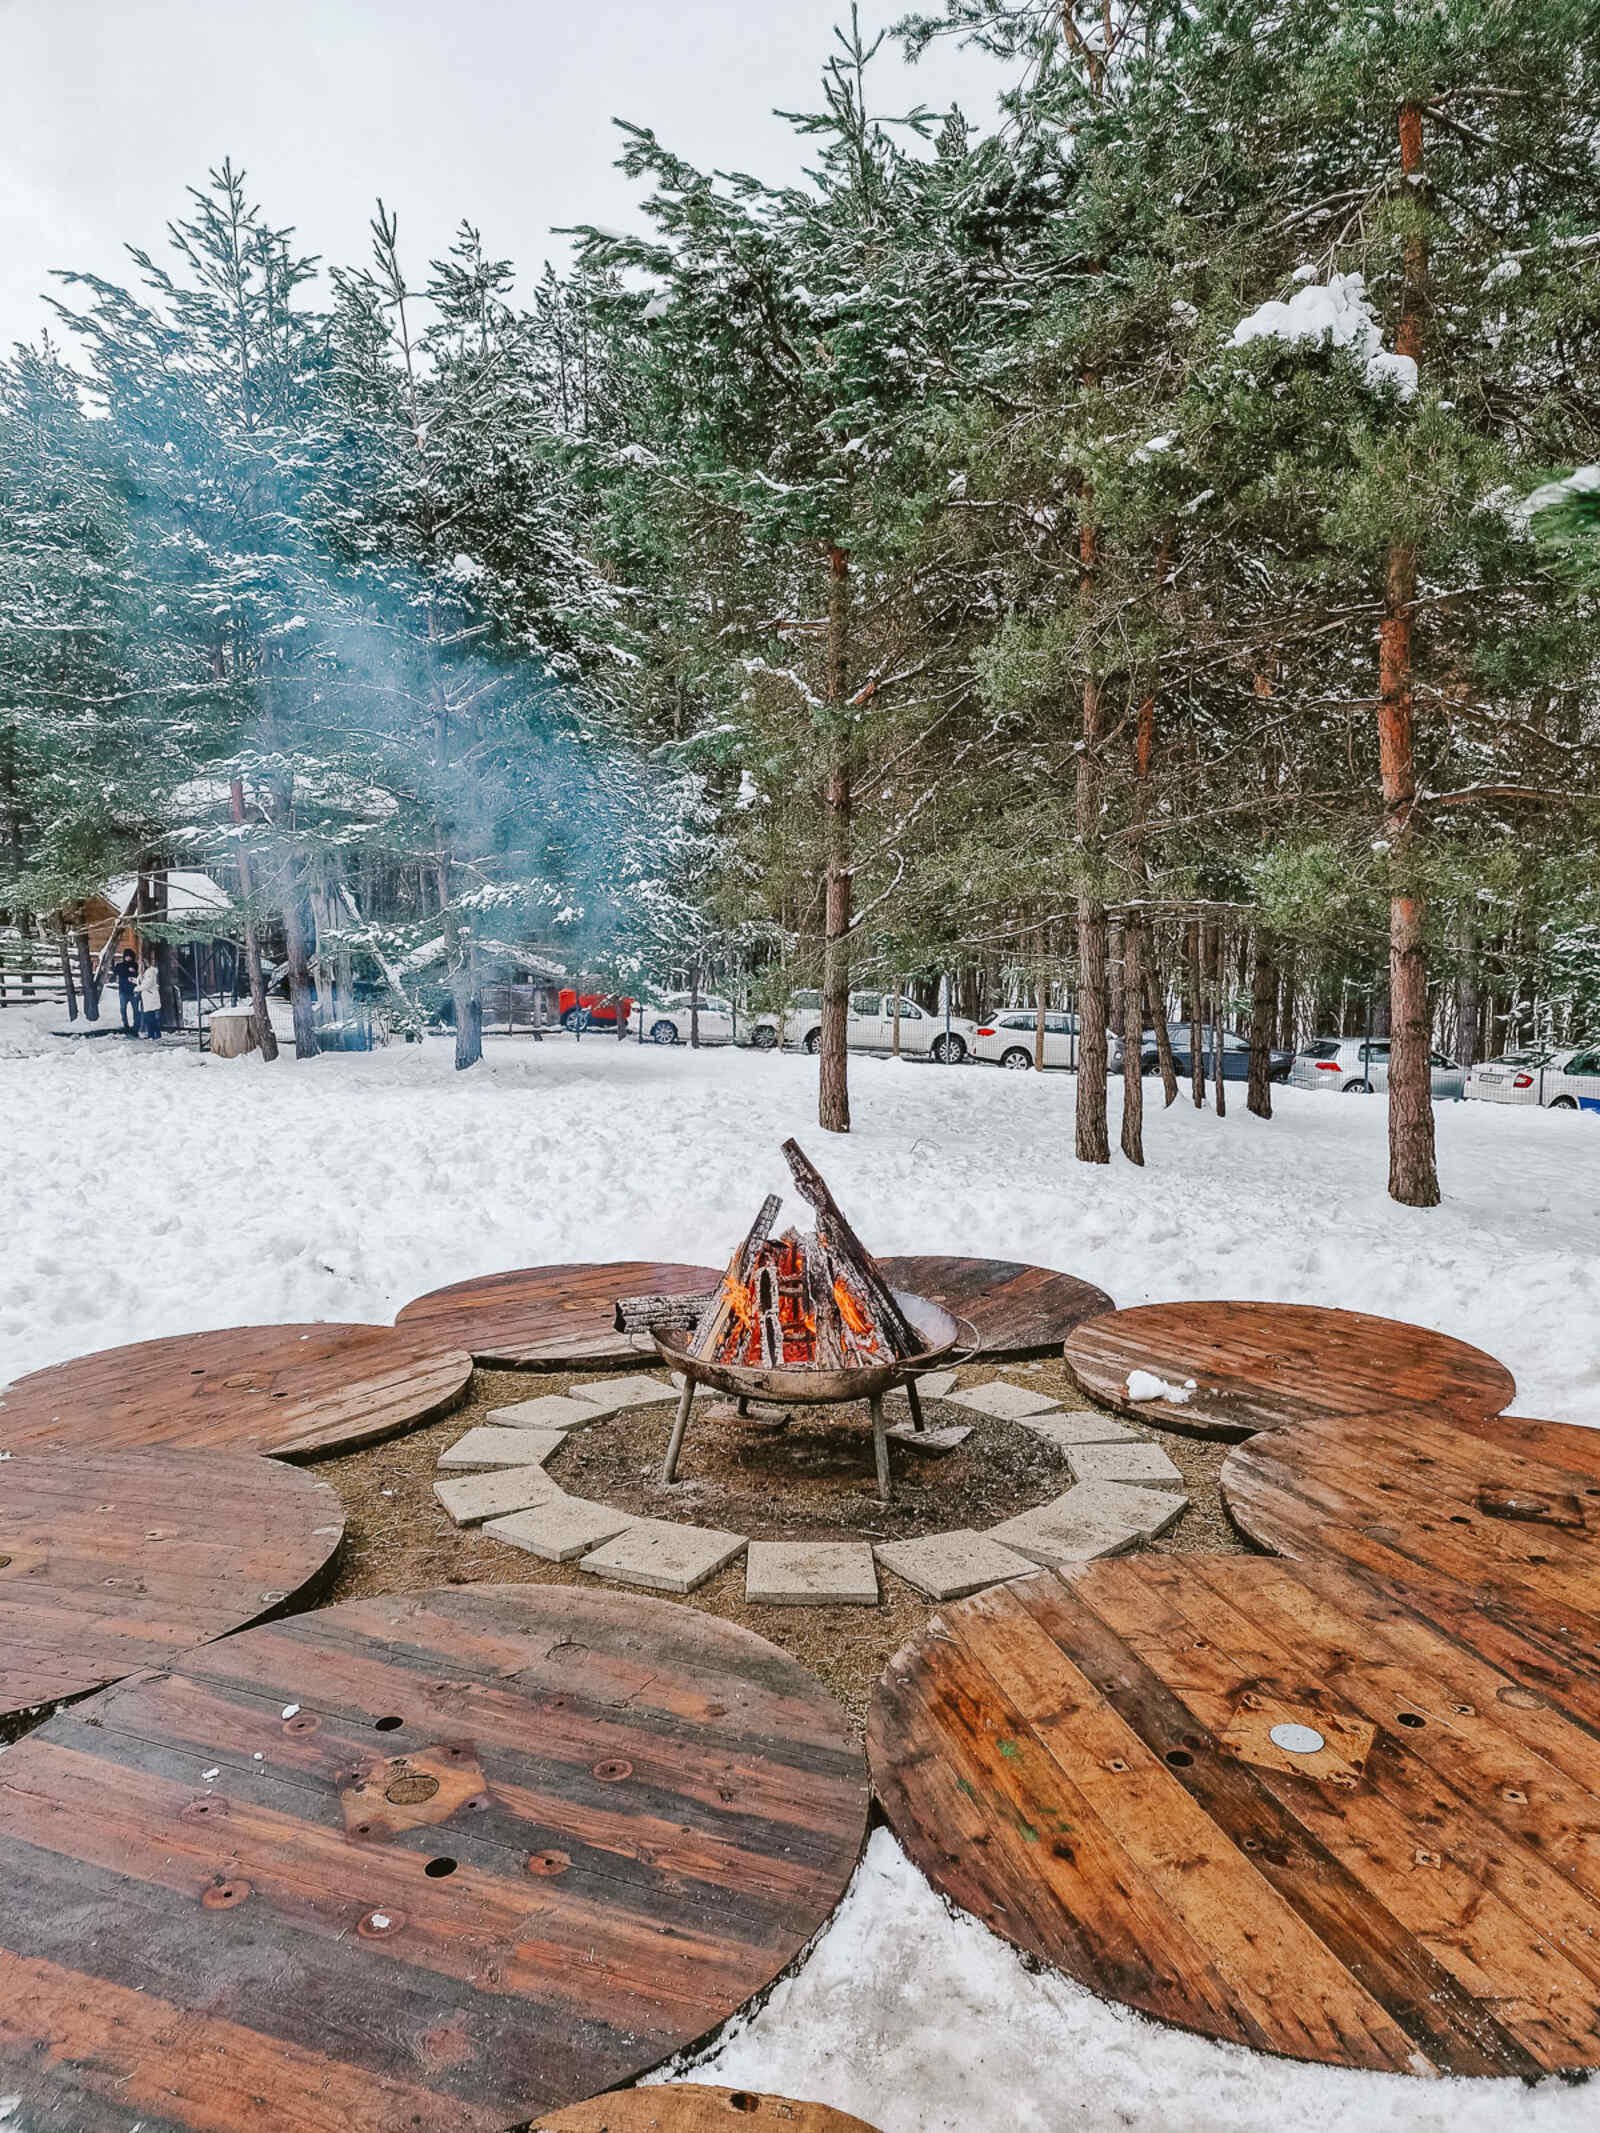 a fire pit with a roaring log fire in the centre of wooden decking with snow on the ground